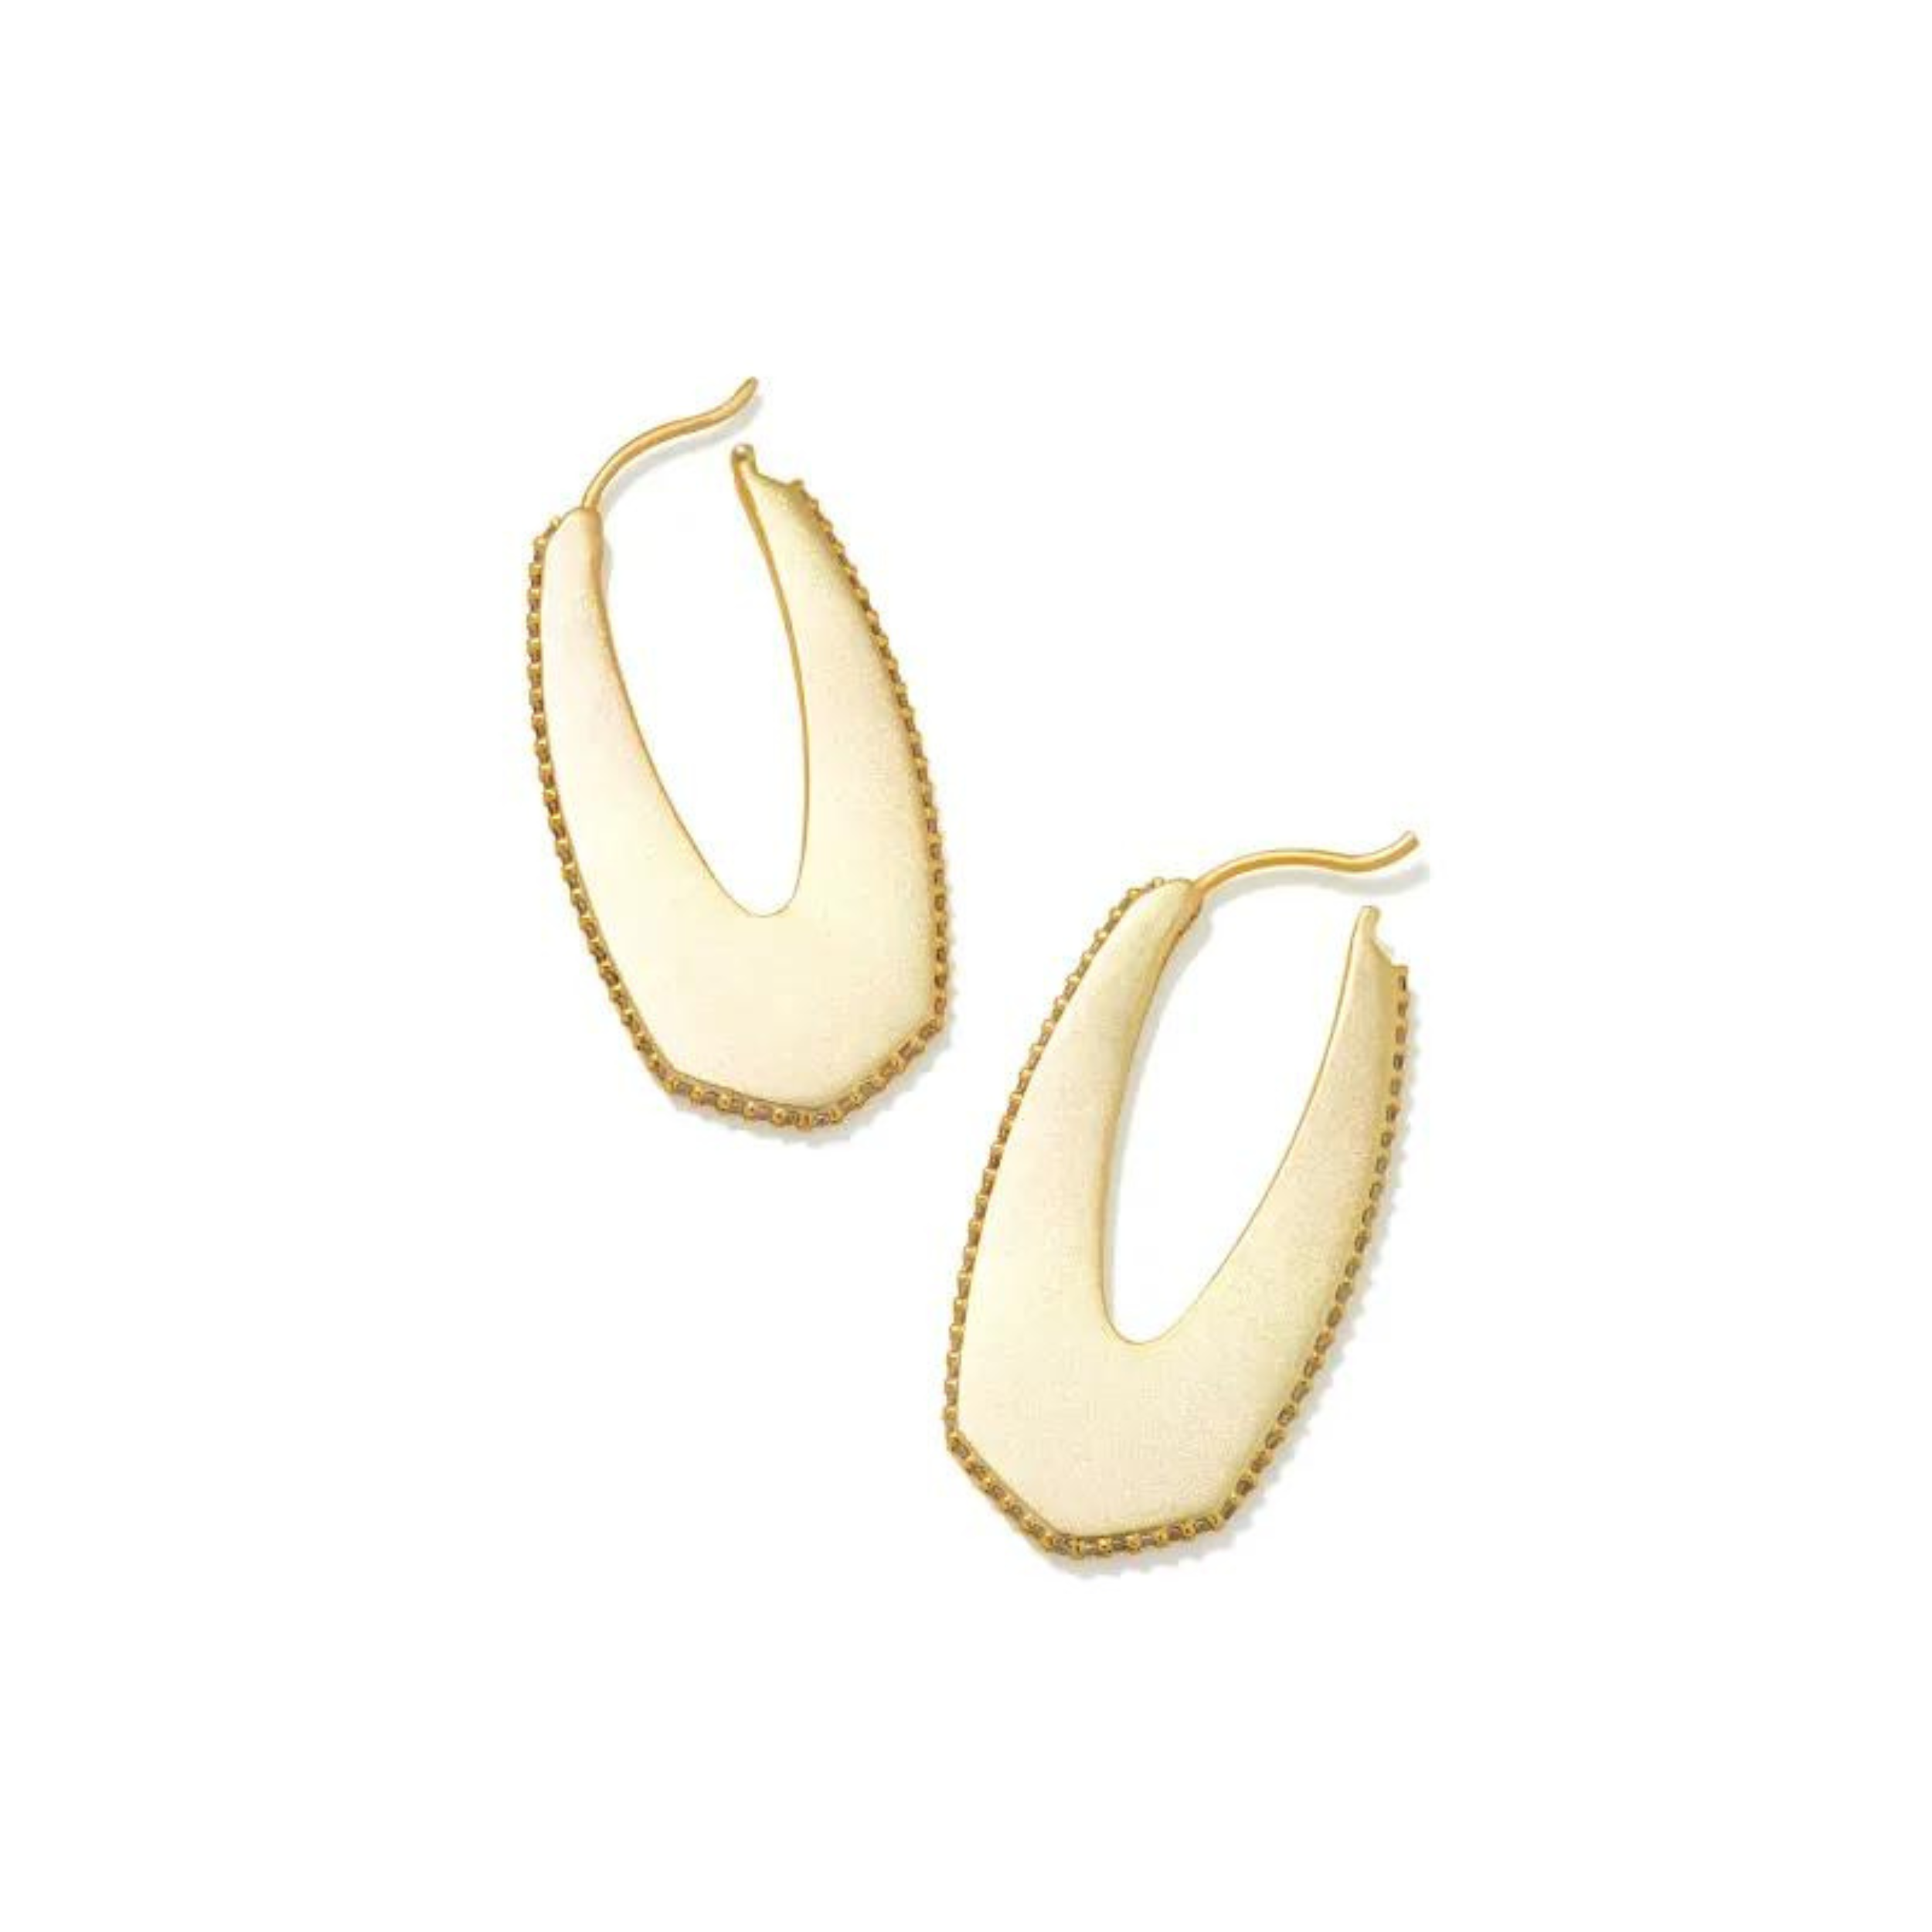 Gold hoop earrings, pictured on a white background.